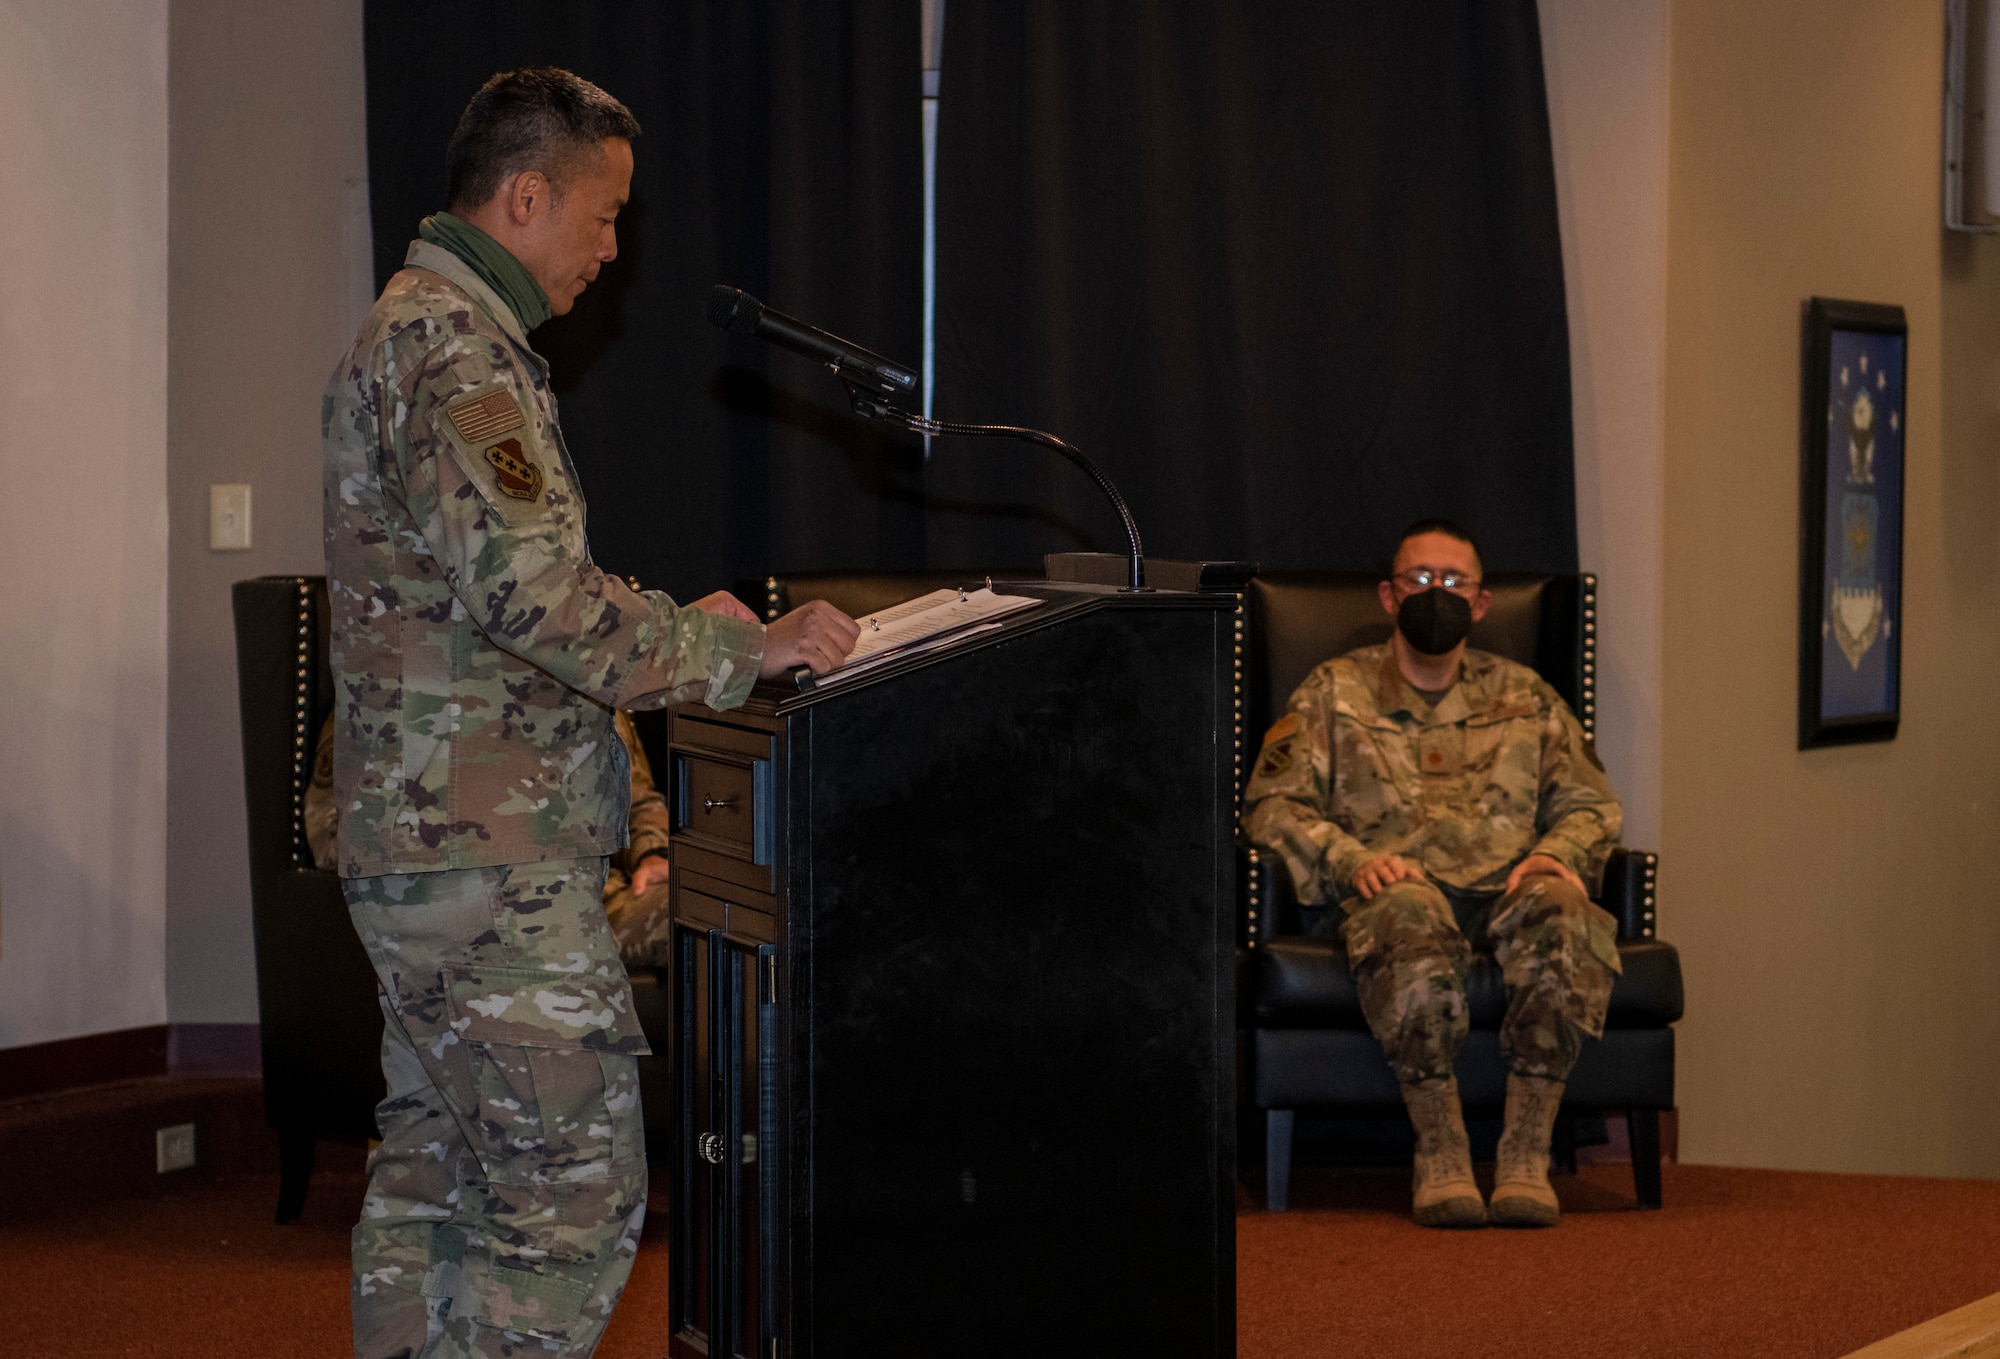 Col. Ed Sumangil, 7th Bomb Wing commander, left, speaks during the assumption of the stole ceremony for Chaplain (Maj.) Gabriel Rios, 7th Bomb Wing wing chaplain, right, at Dyess Air Force Base, Texas, Mar. 24, 2021.